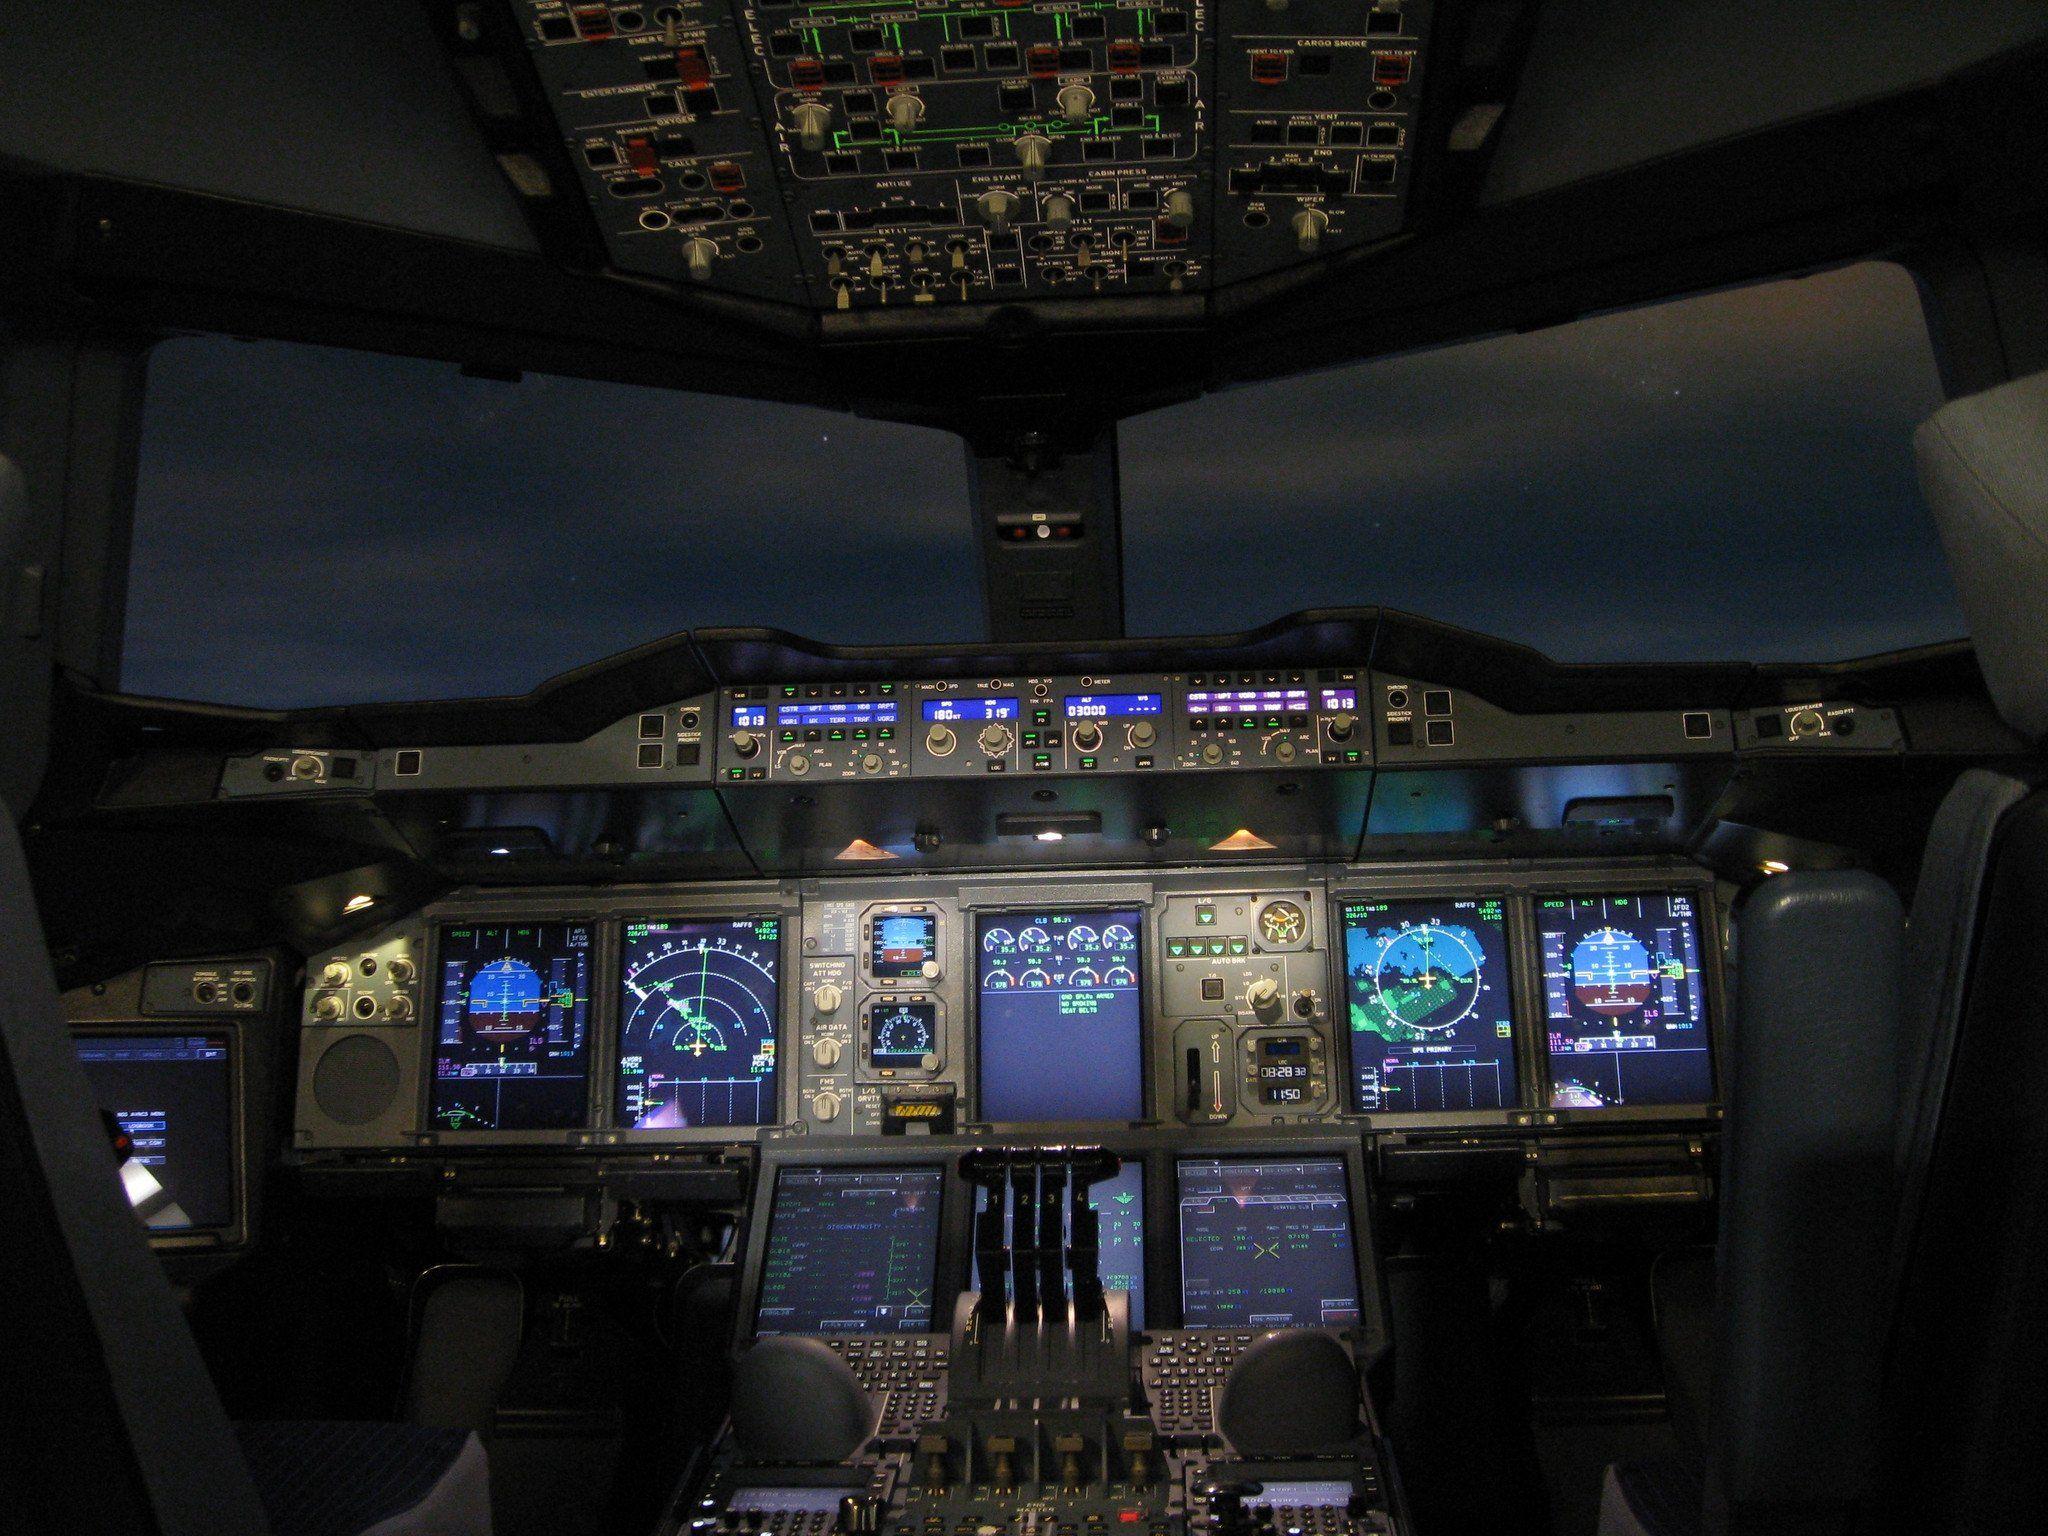 Airbus A380 Cockpit Printed Canvas Poster. Pilot Eyes Store